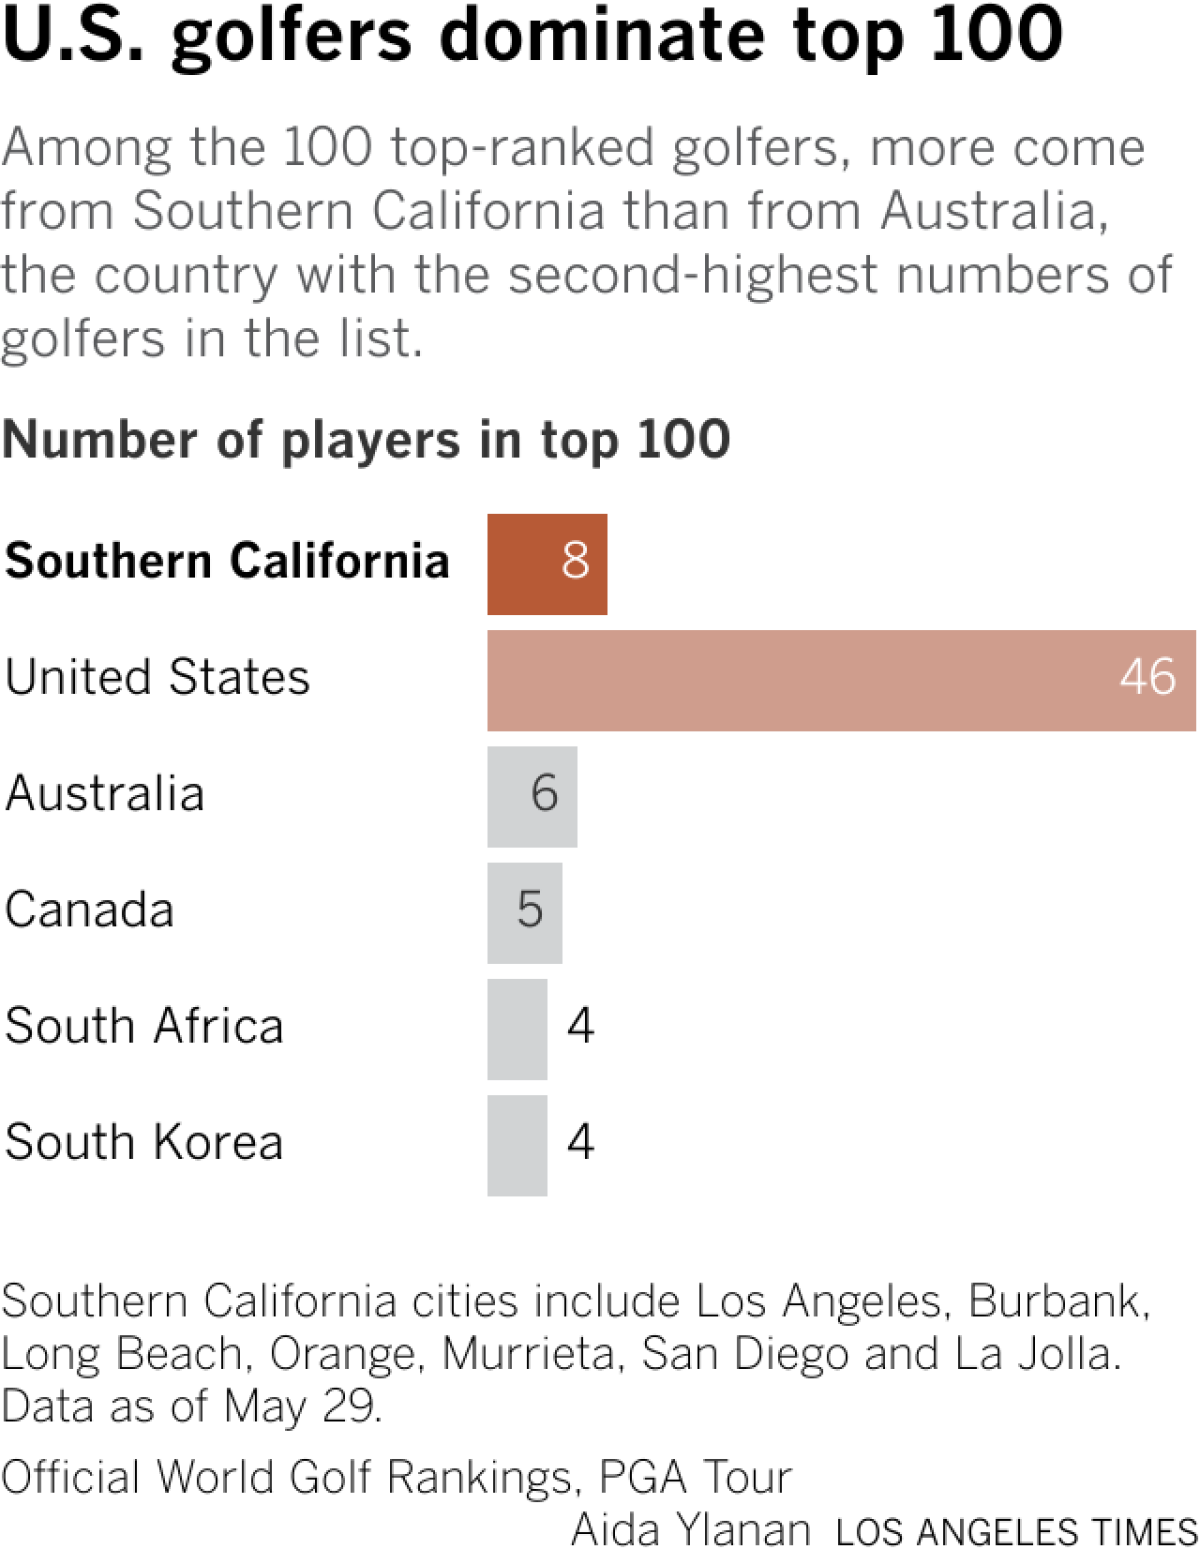 A bar chart showing the 5 countries with the most number of players in OWGR's Top 100 golfers ranking. U.S. is first, with 54 players, followed by Australia at 6, Canada at 5, and South Africa and South Korea each at 4 players.